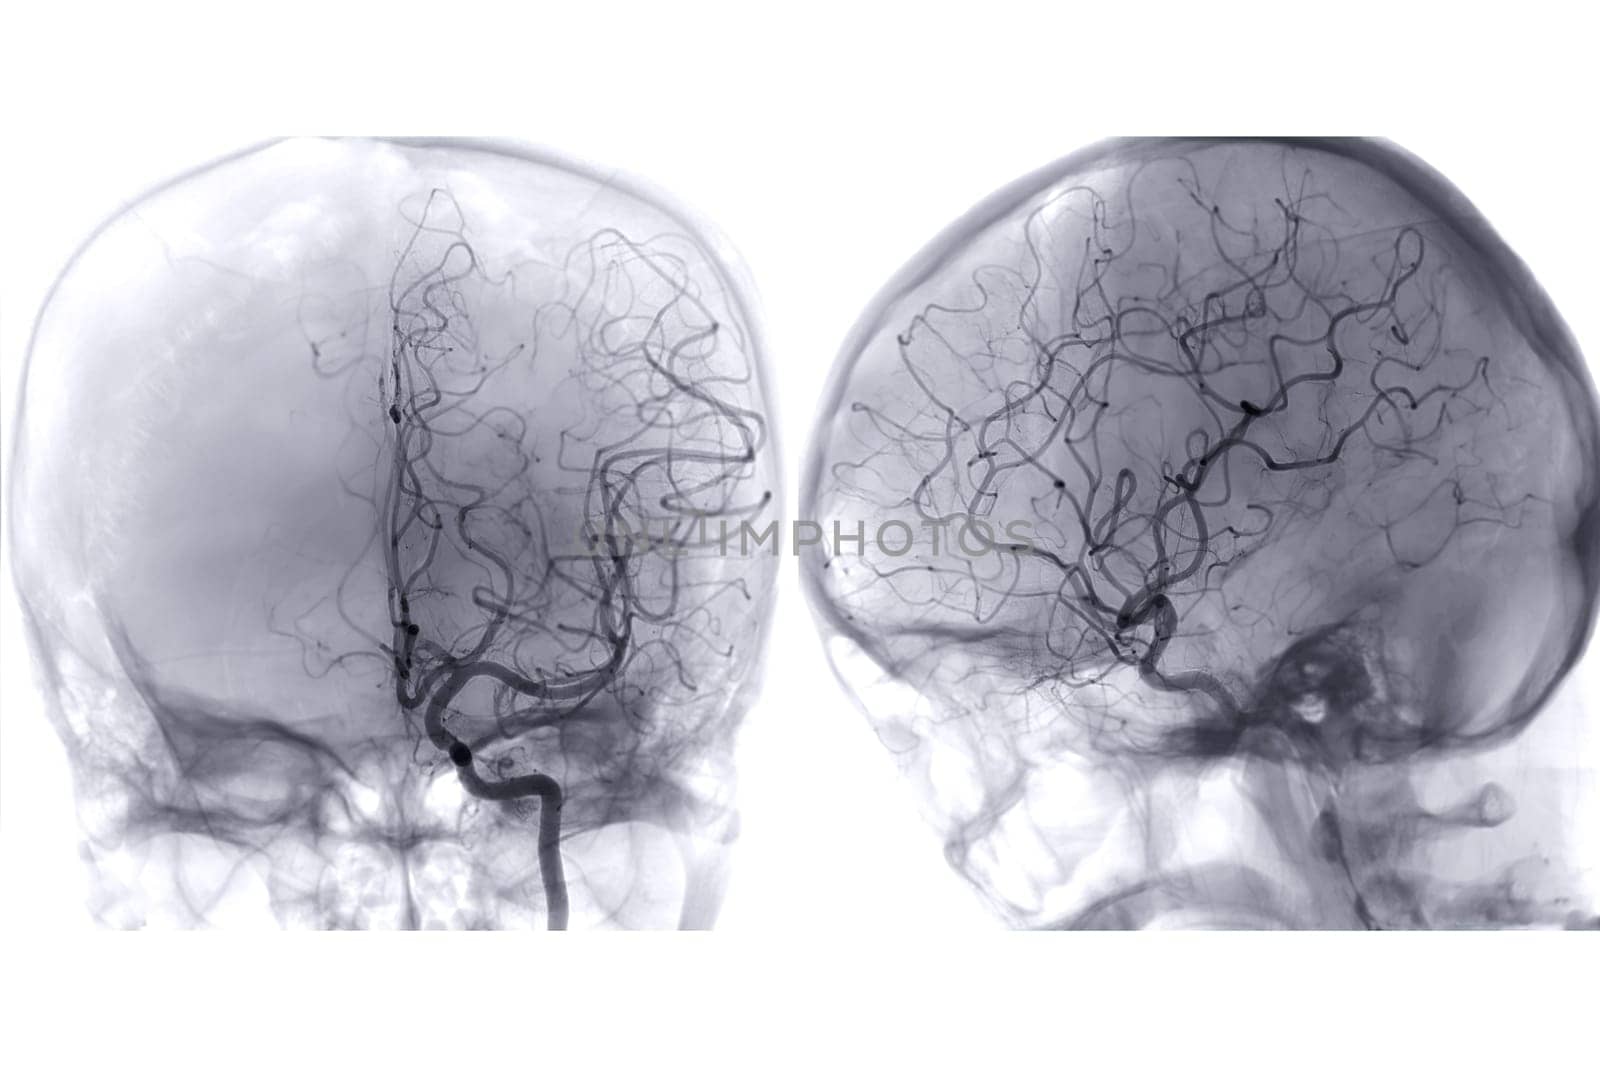 Cerebral angiography  image from Fluoroscopy in intervention radiology  showing cerebral artery. by samunella